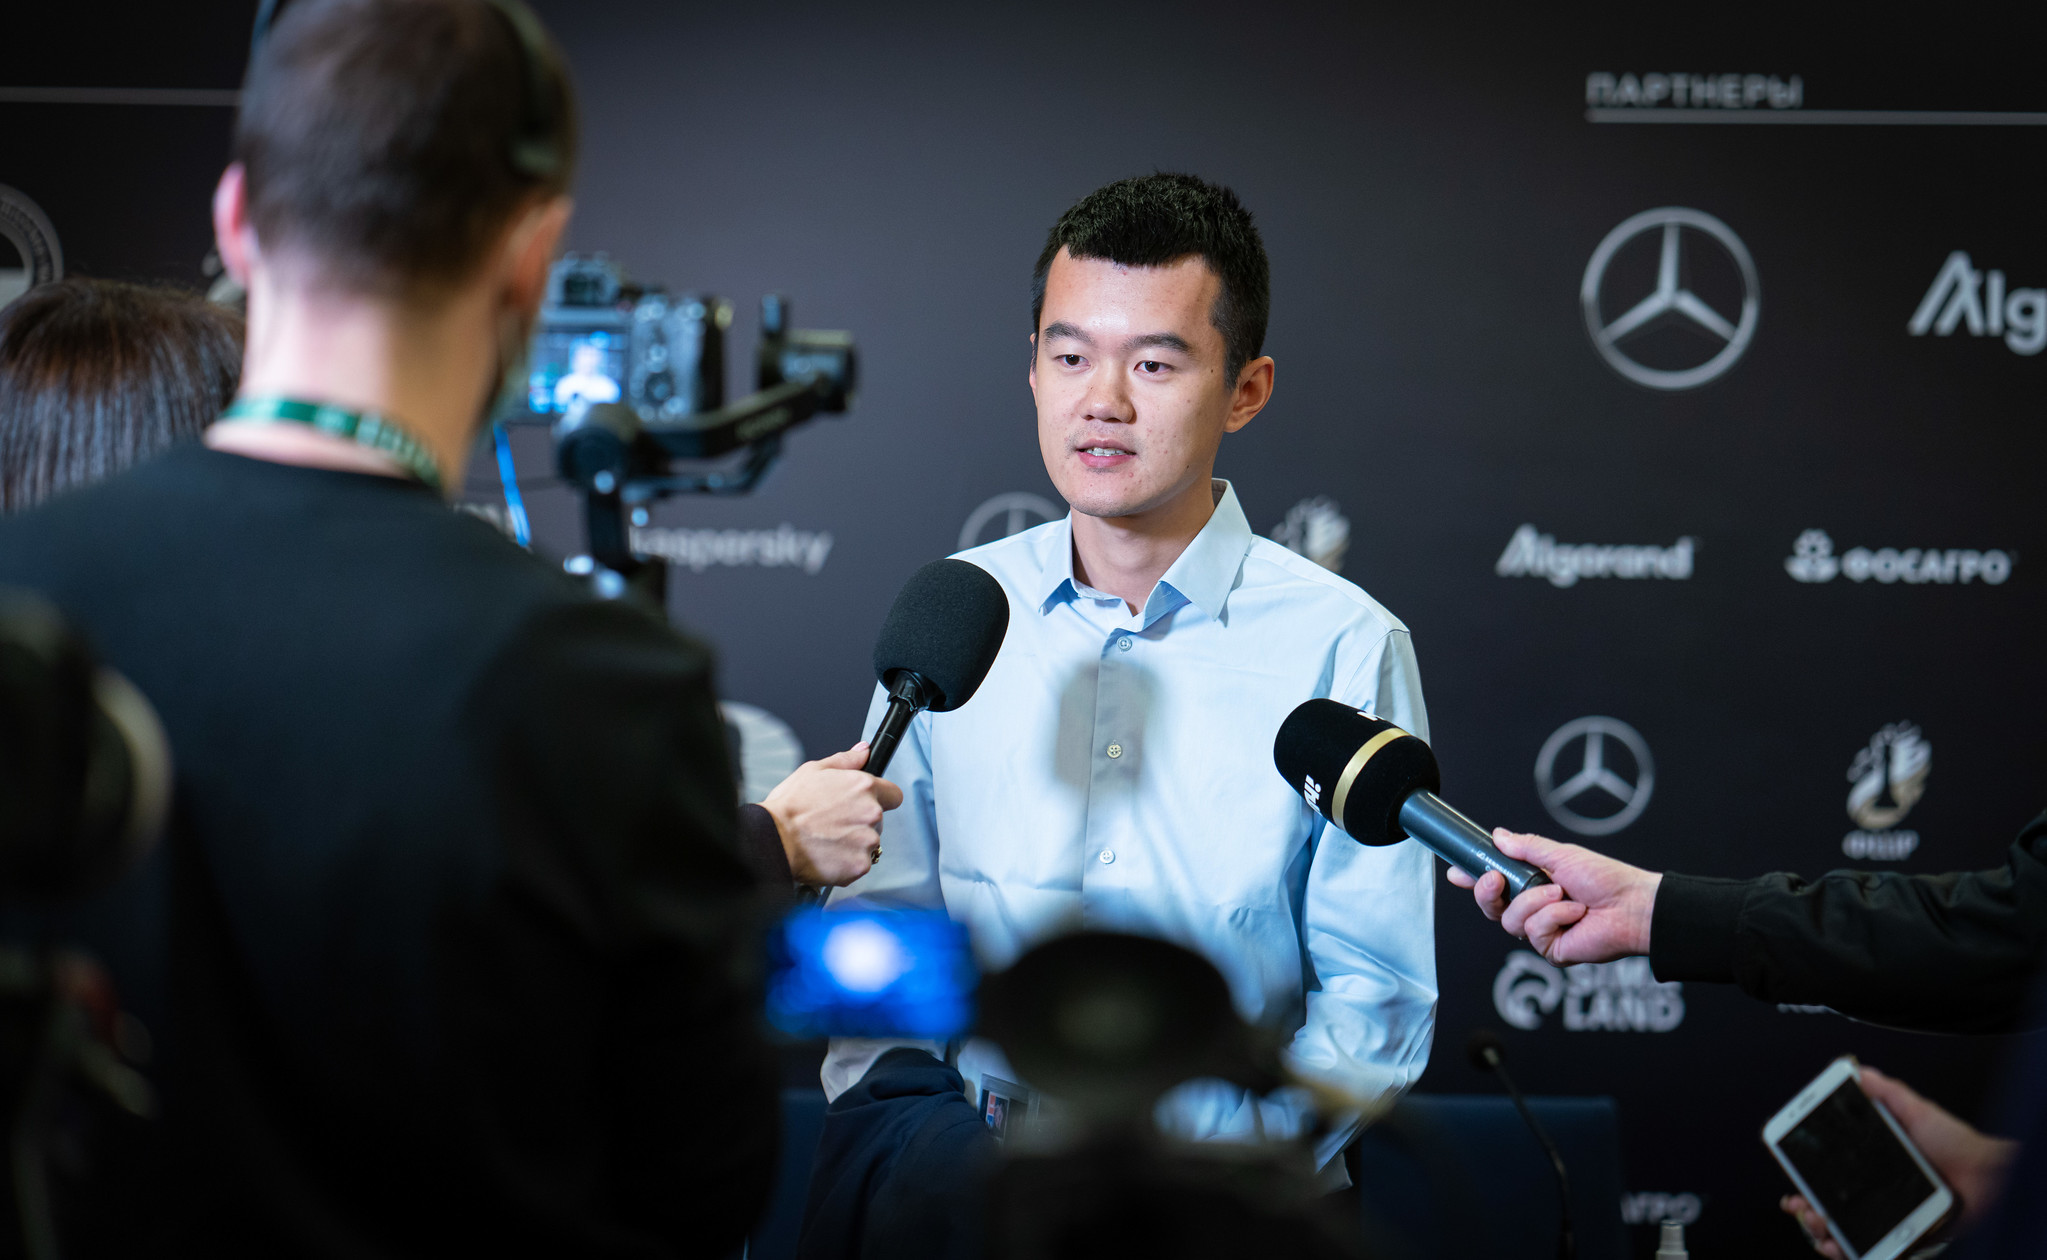 Ding Liren is on his way to the FIDE Candidates Tournament 2022 – Chessdom